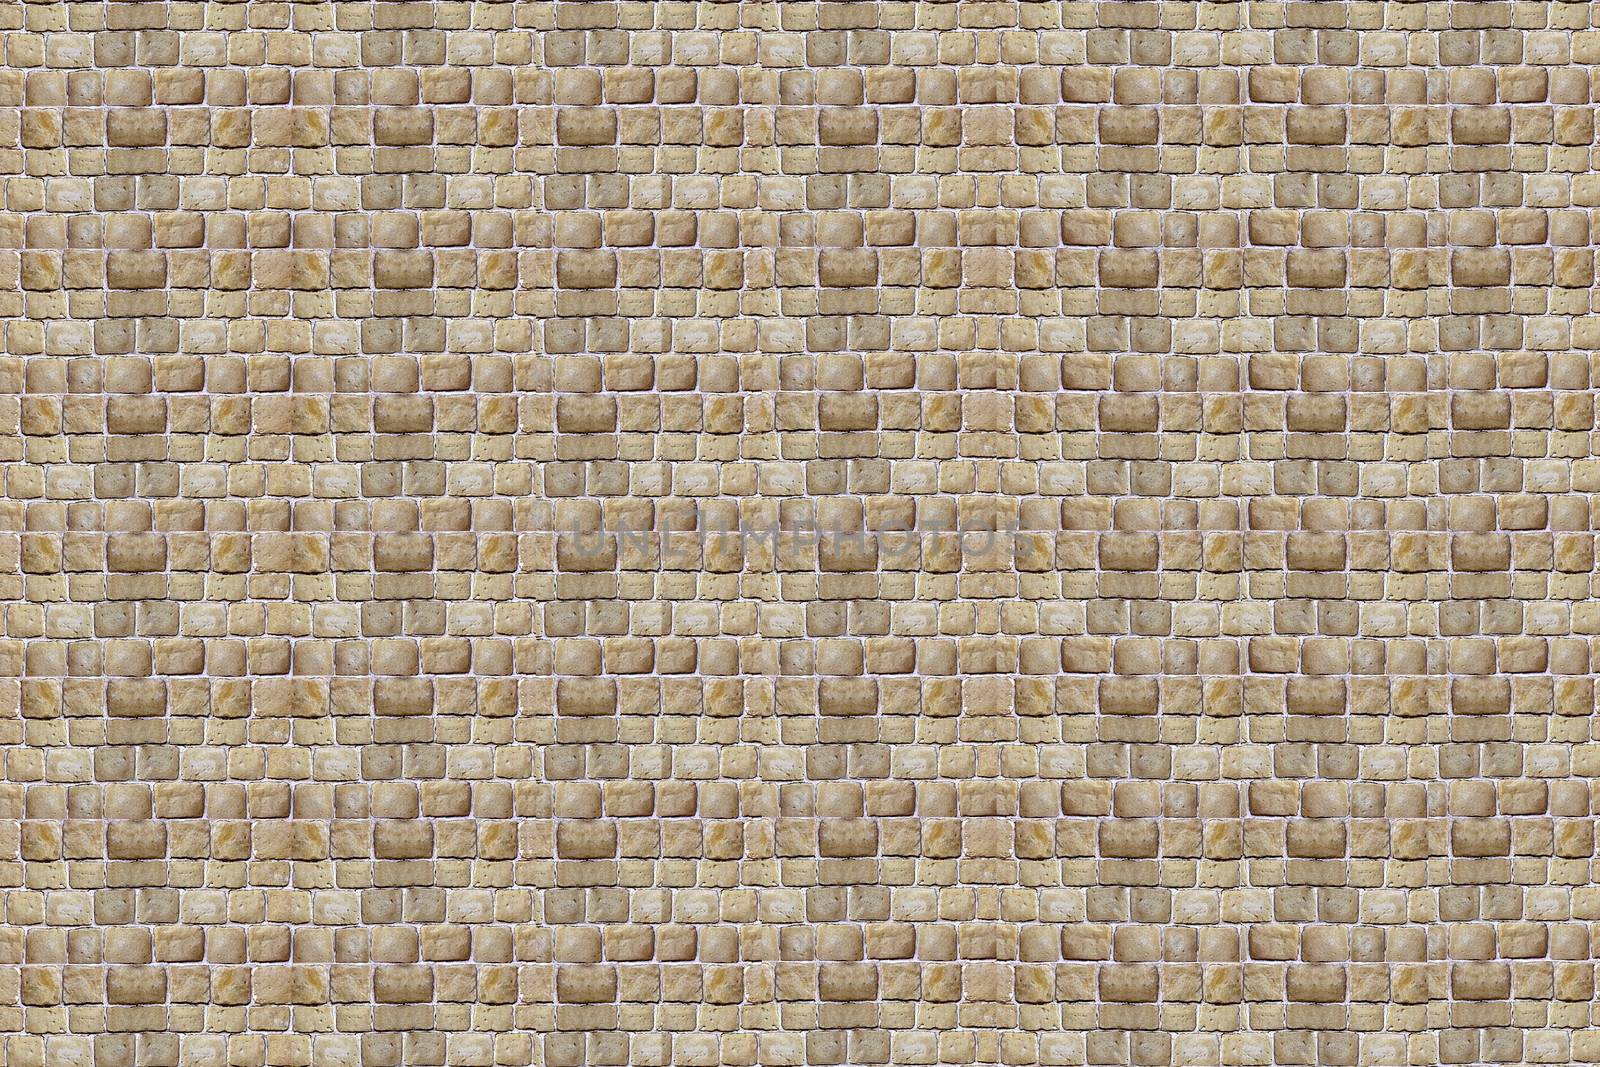 rows of tiles to create a driveway or a stone wall